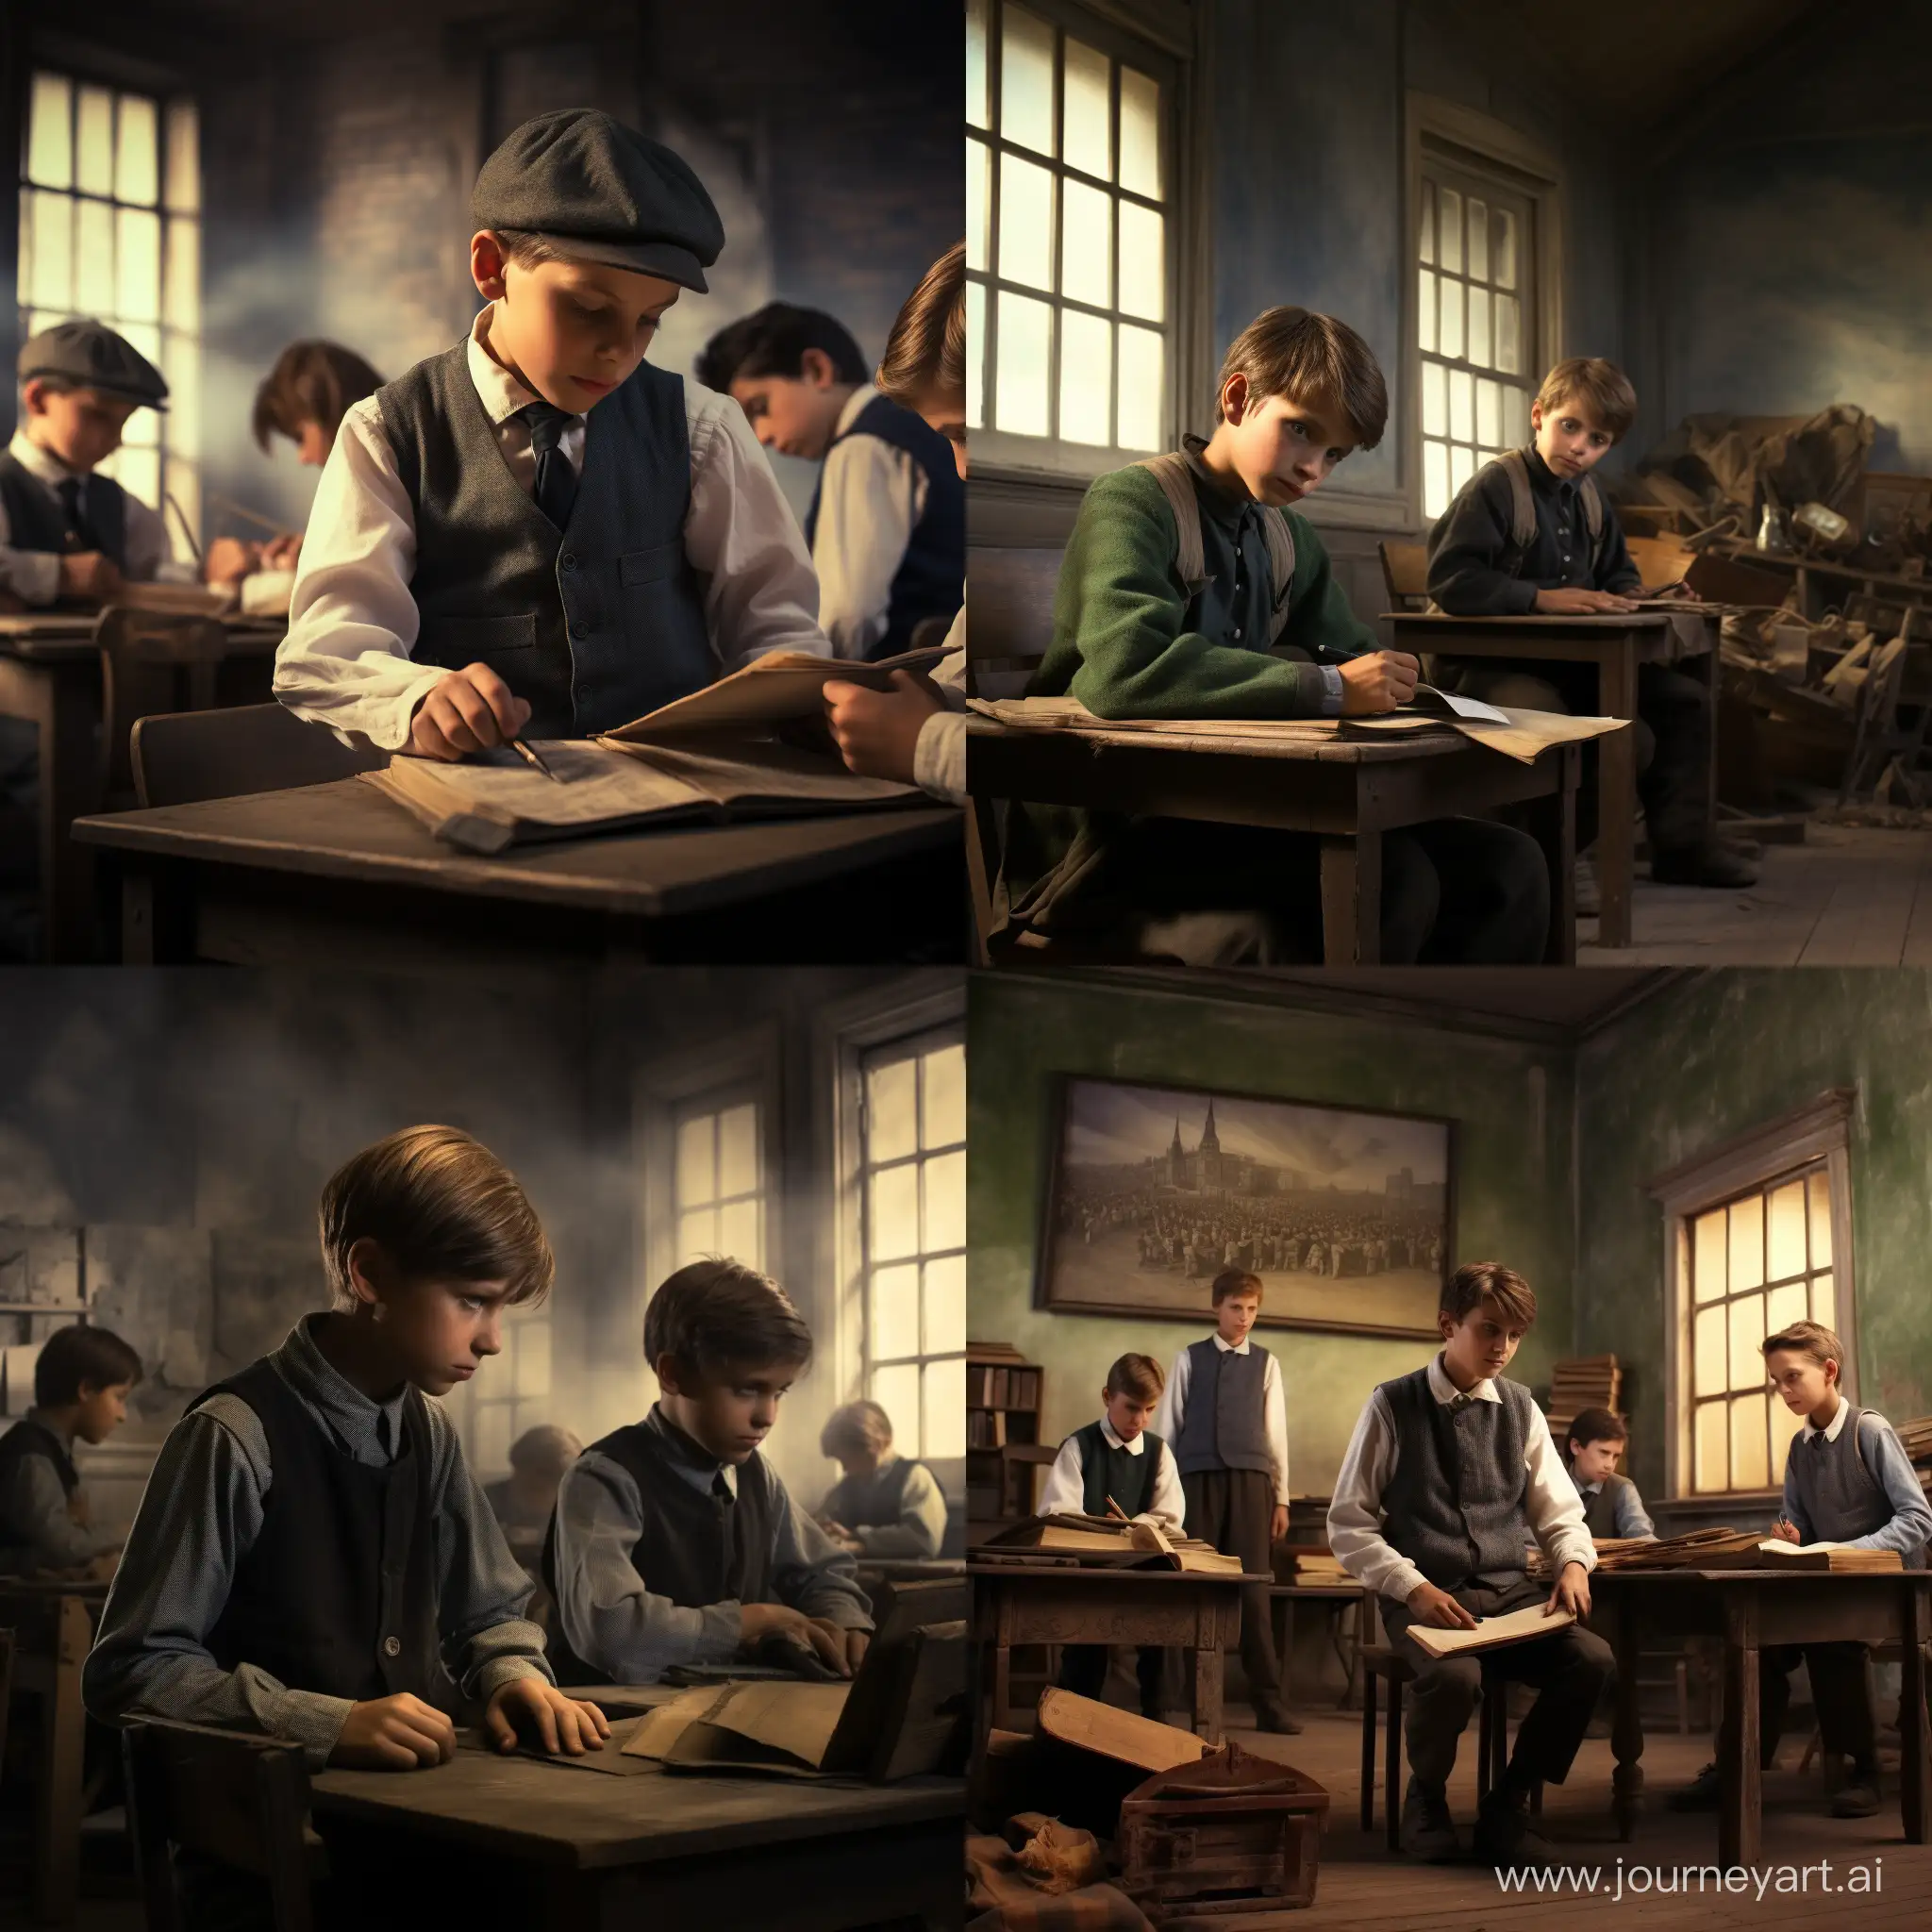 realistic photo of a school room. Boys dressed in poor clothes sit on school desks. A photo in the atmosphere of the 19th century, mysterious scenery